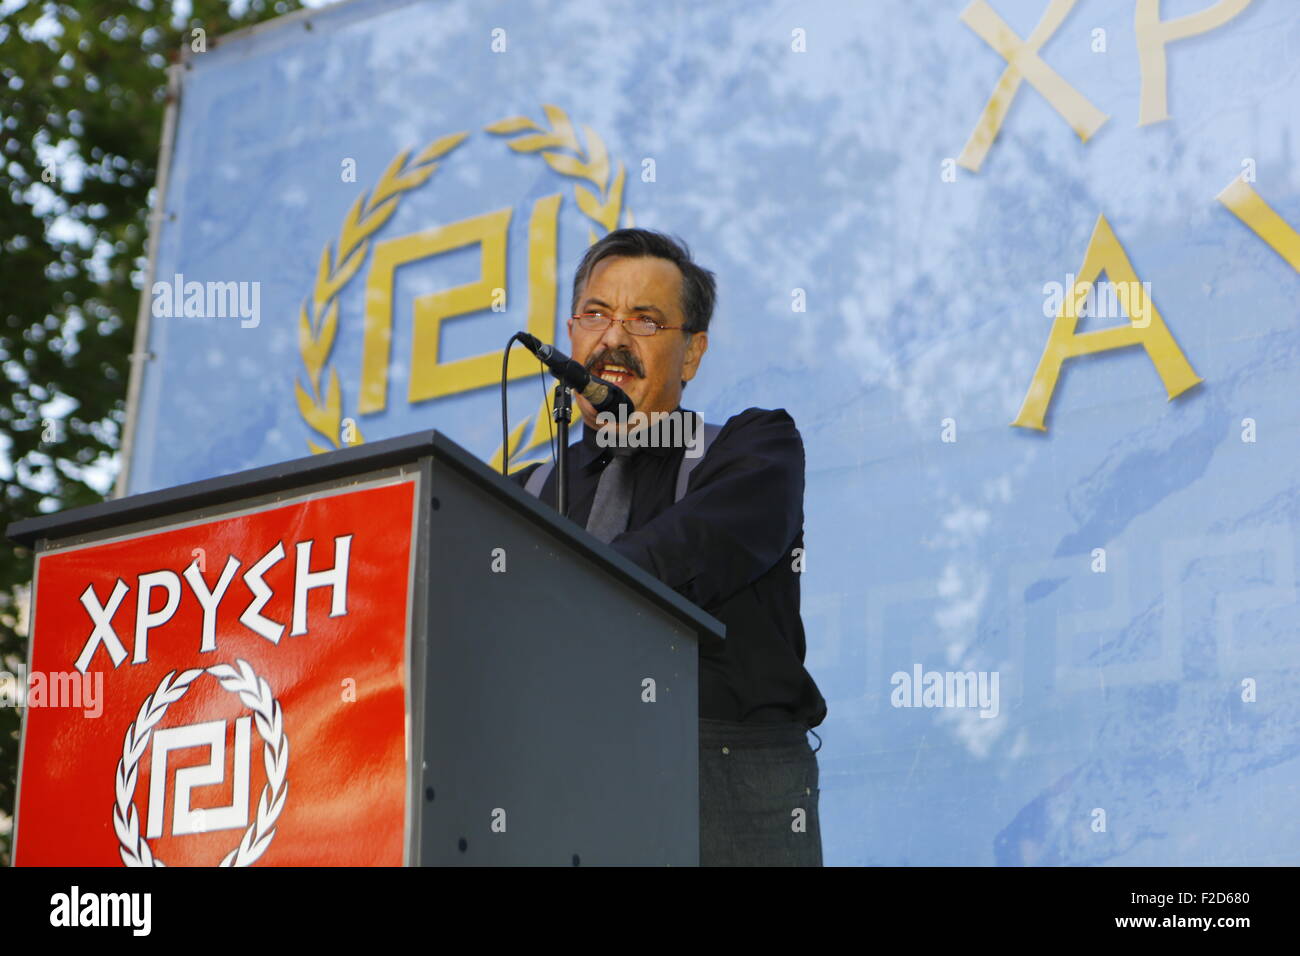 Athens, Greece. 16th Sep, 2015. Golden Dawn MP (Member of Parliament) Christos Pappas addresses the election rally. Greek right wing party Golden Dawn held an election rally in Athens, four days ahead of election day. The party hopes to gain enough seats in the election to become the third latest party in the Greek Parliament. Credit:  Michael Debets/Pacific Press/Alamy Live News Stock Photo